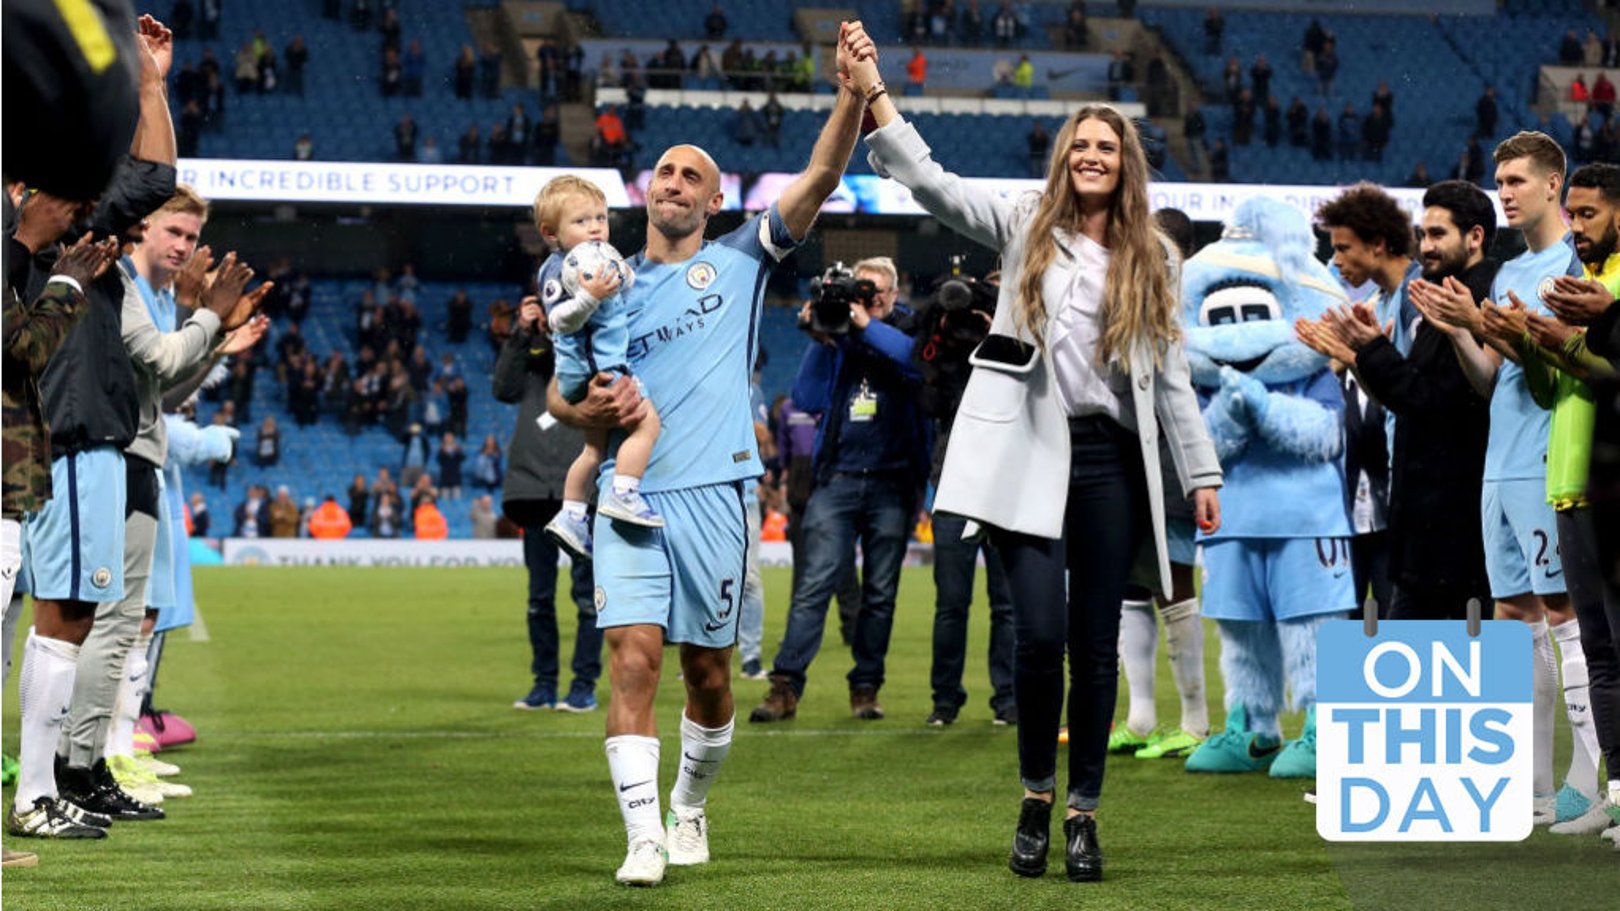 On This Day: It's farewell to Zaba and Horton departs